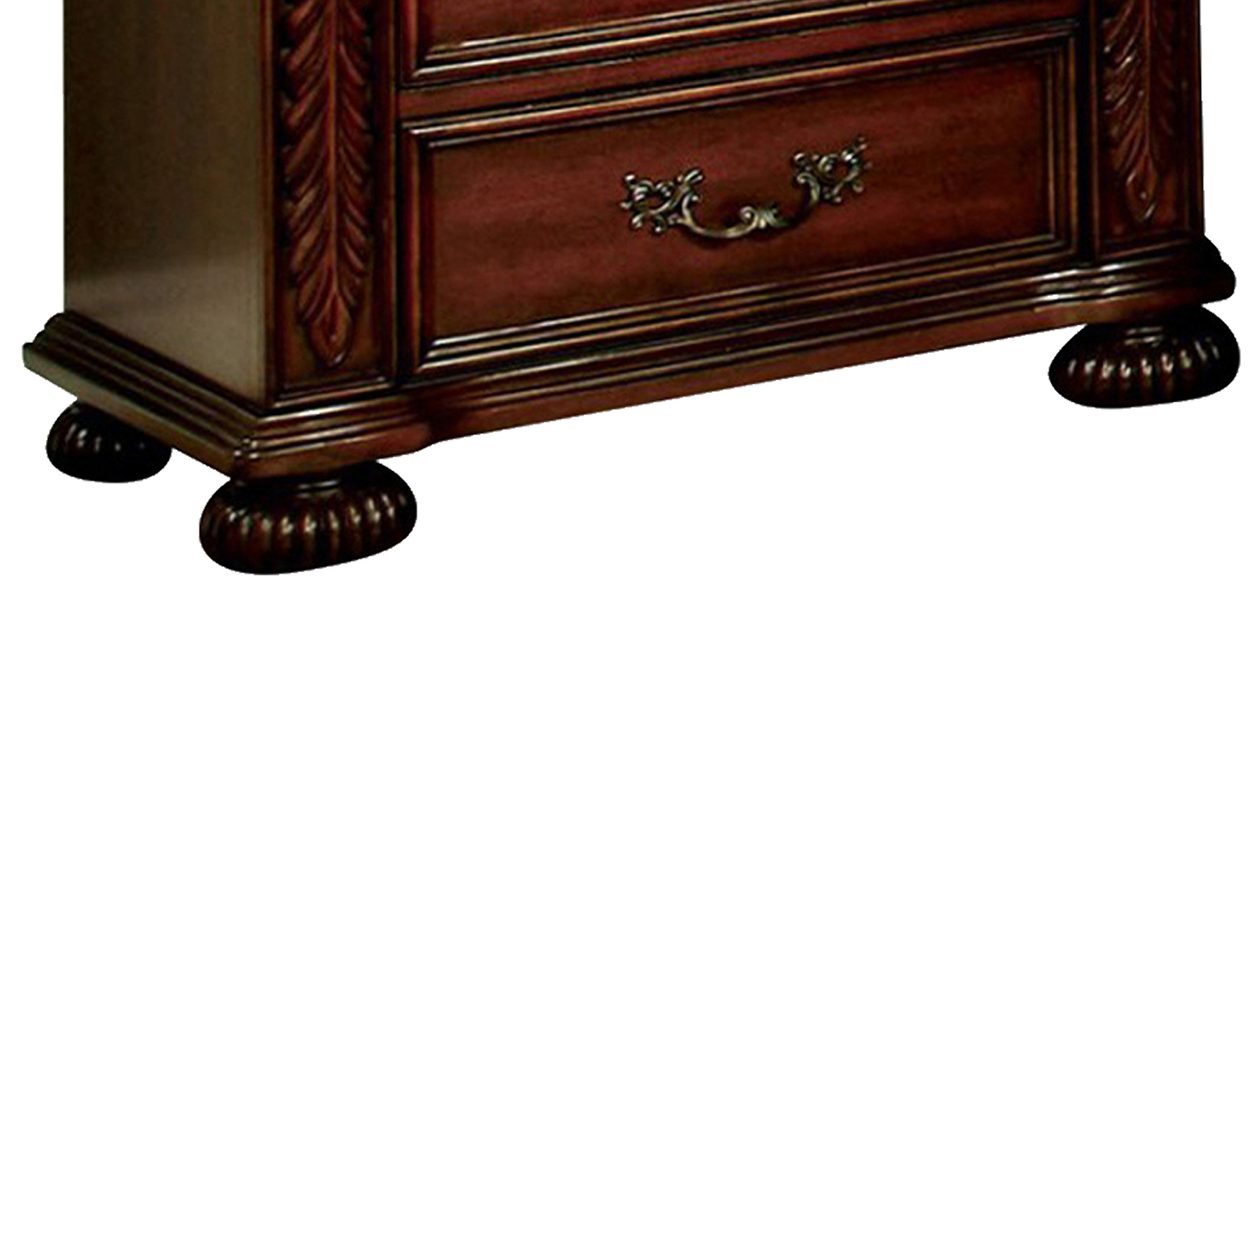 29 Inch Handcrafted Vintage Style Nightstand, 3 Drawers, Carved Trim, Cherry Brown Wood- Saltoro Sherpi